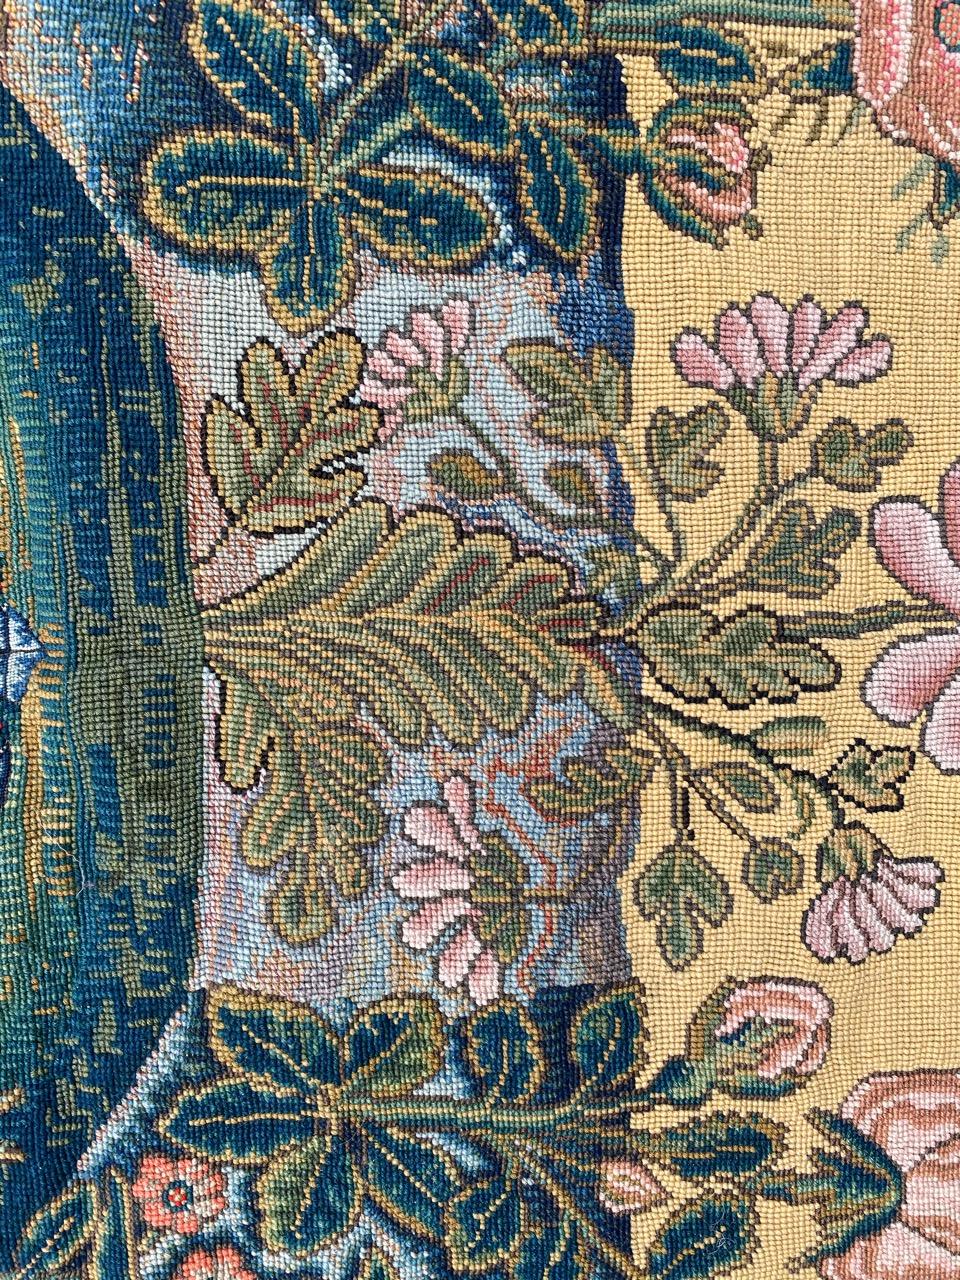 Wonderful Antique Early 19th Century French Needlepoint Tapestry 1